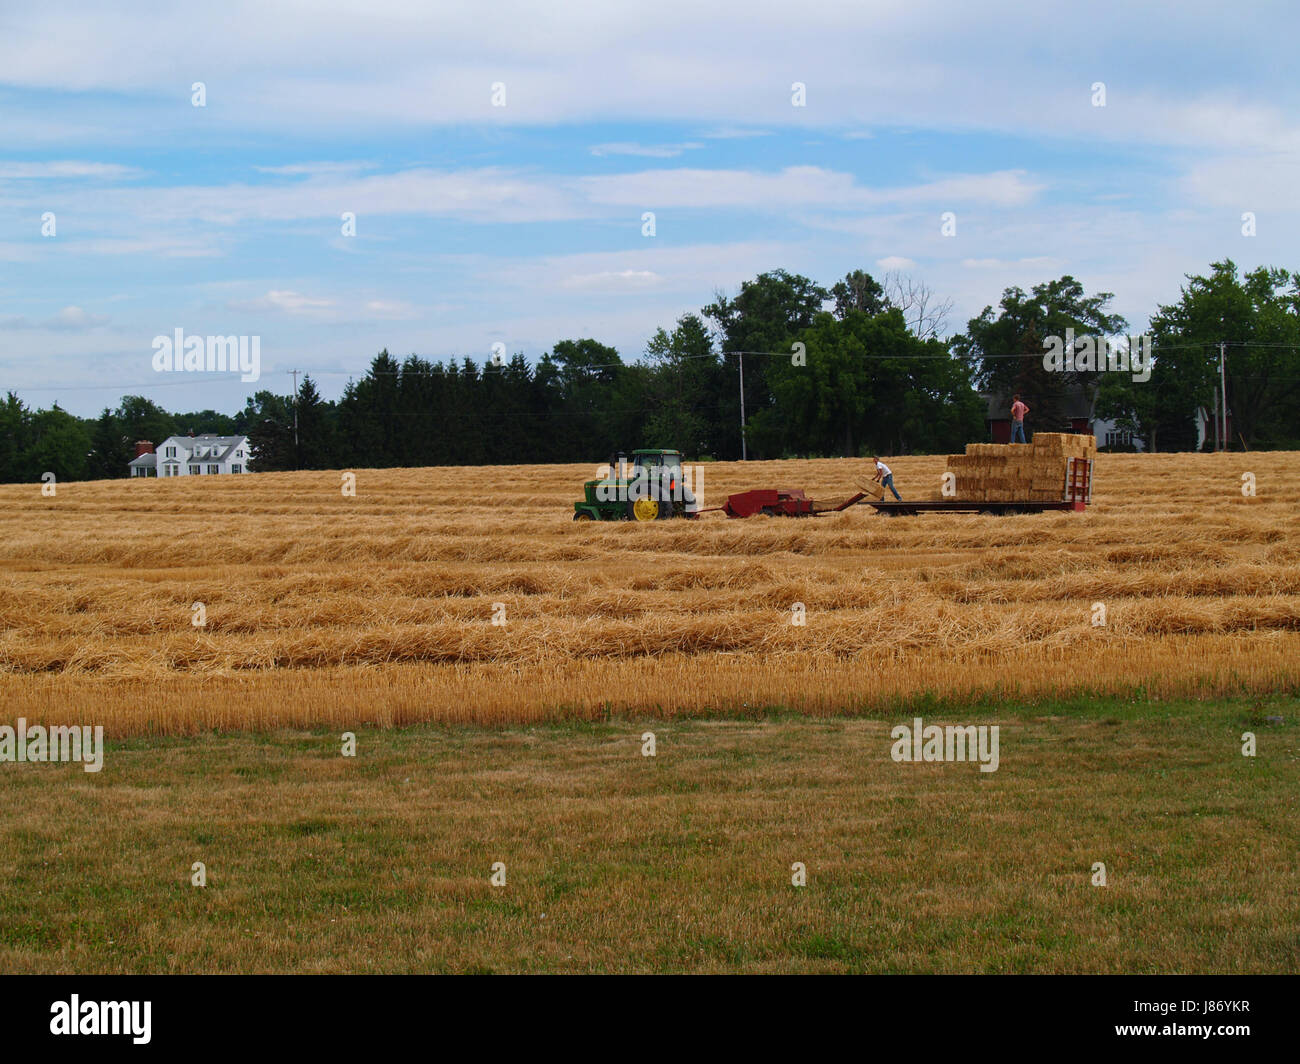 agriculture, farming, field, wheat, farm, straw, house, building, agricultural, Stock Photo